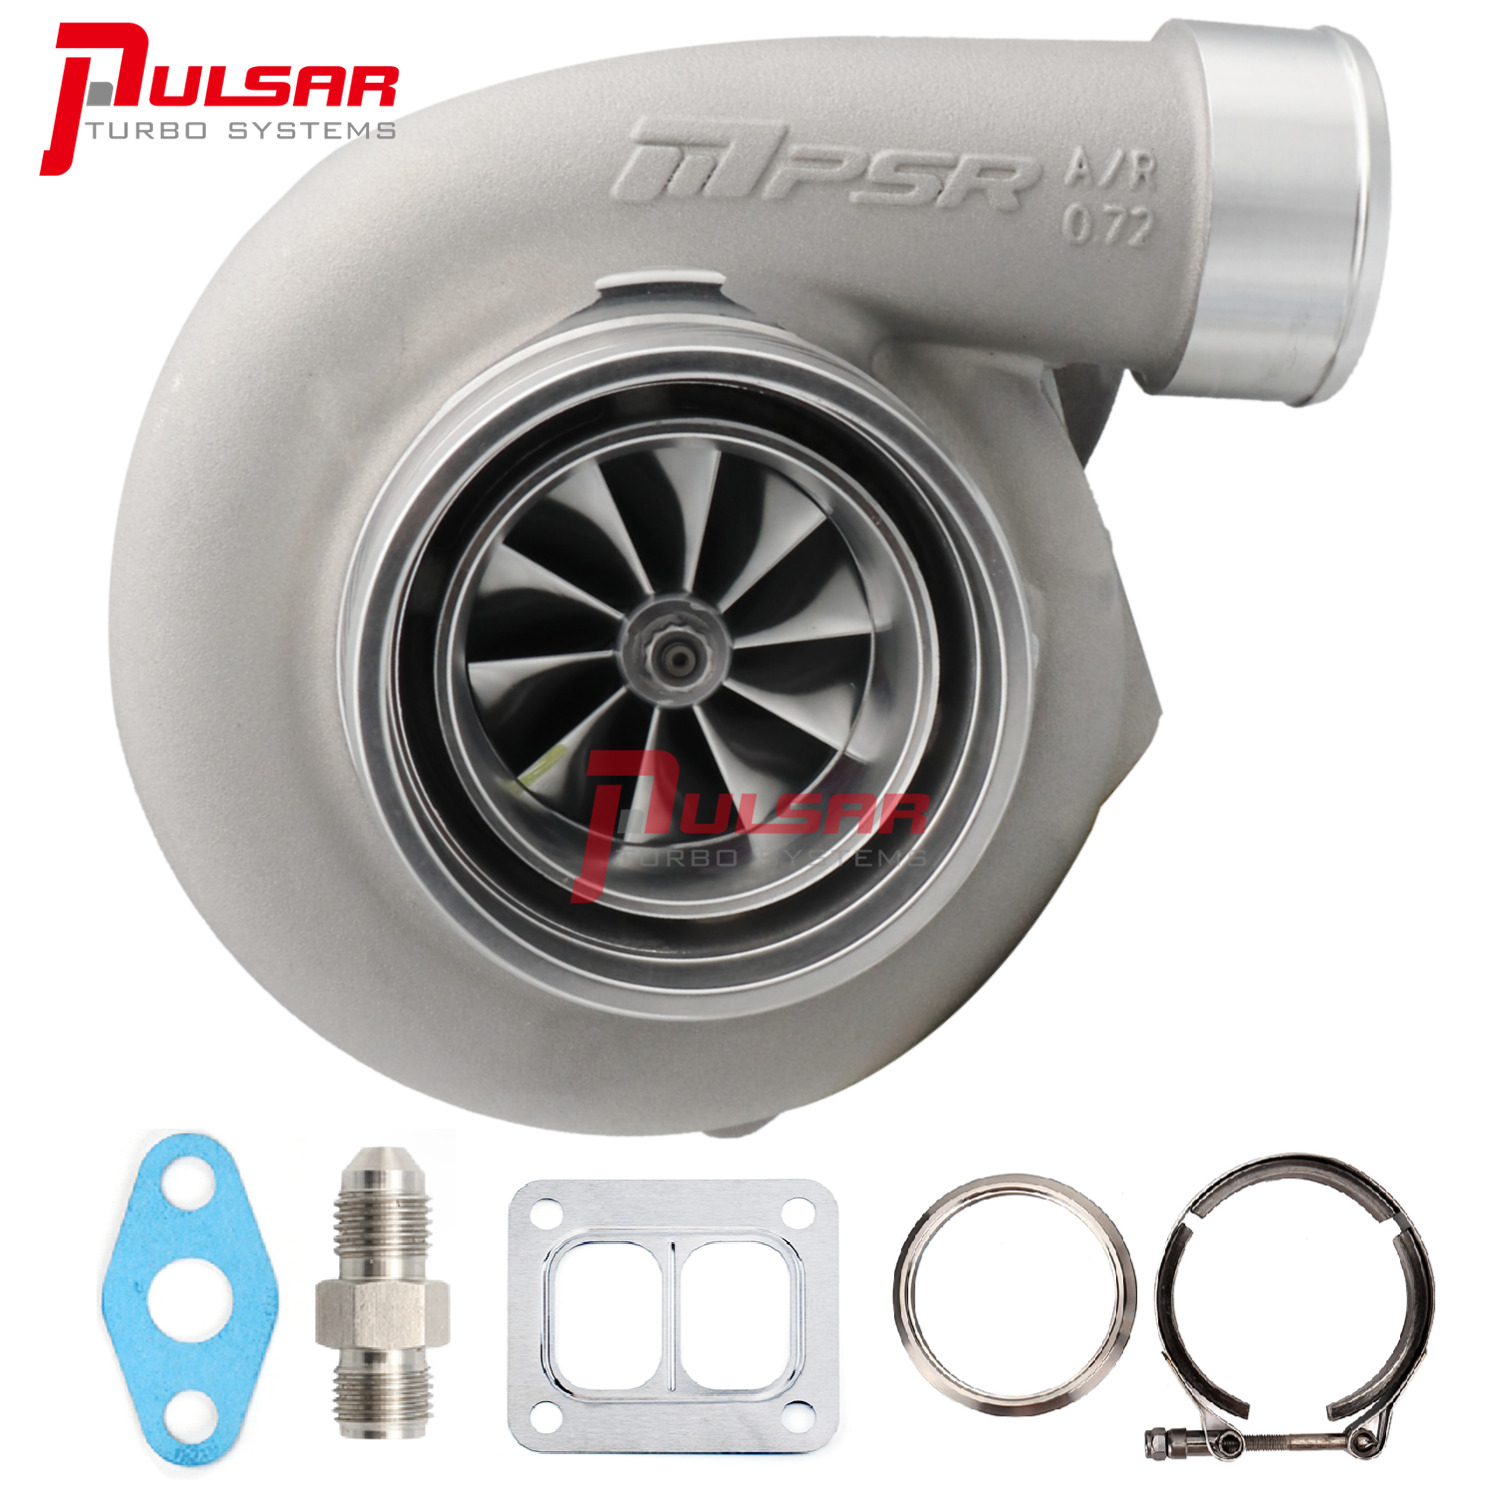 Pulsar Turbo PSR3584 GEN2 Ball Bearing Turbo T4 Divided, Vband Outlet 0.85A/R